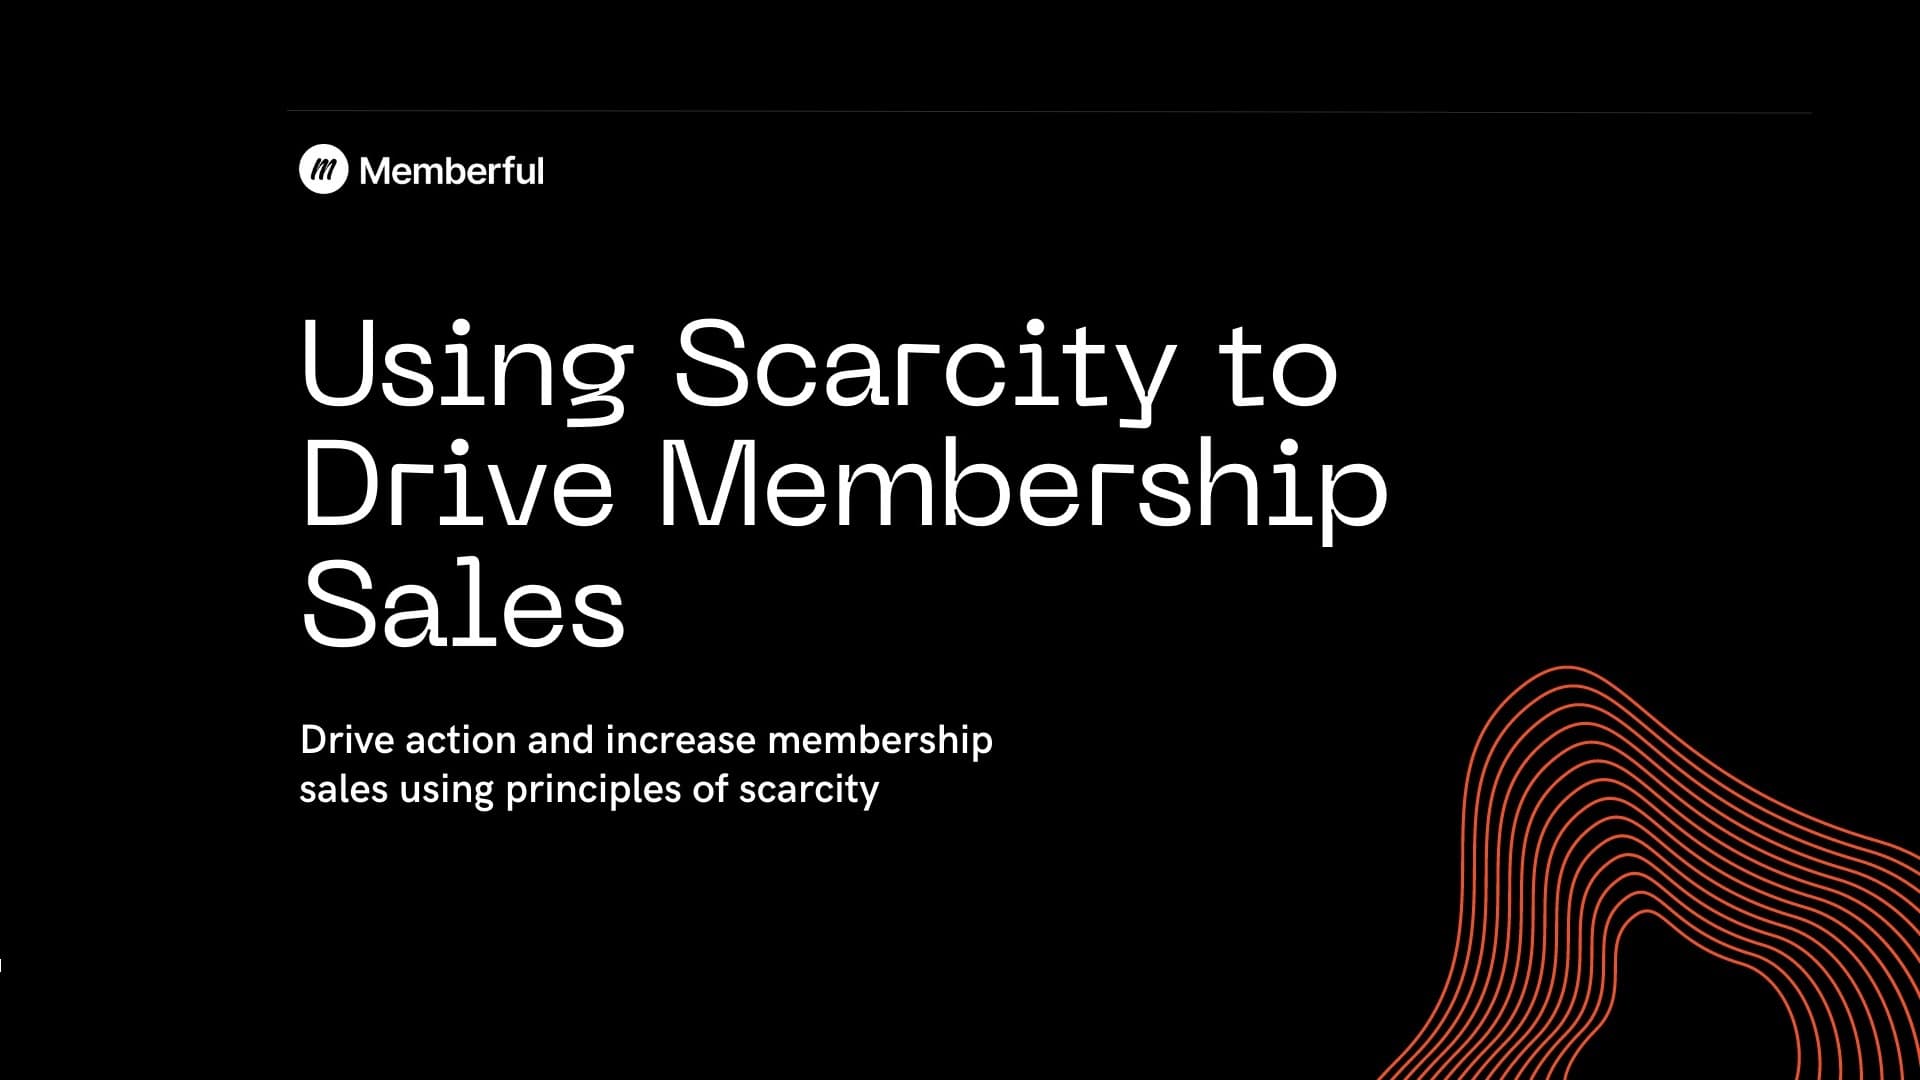 Using scarcity to drive membership sales